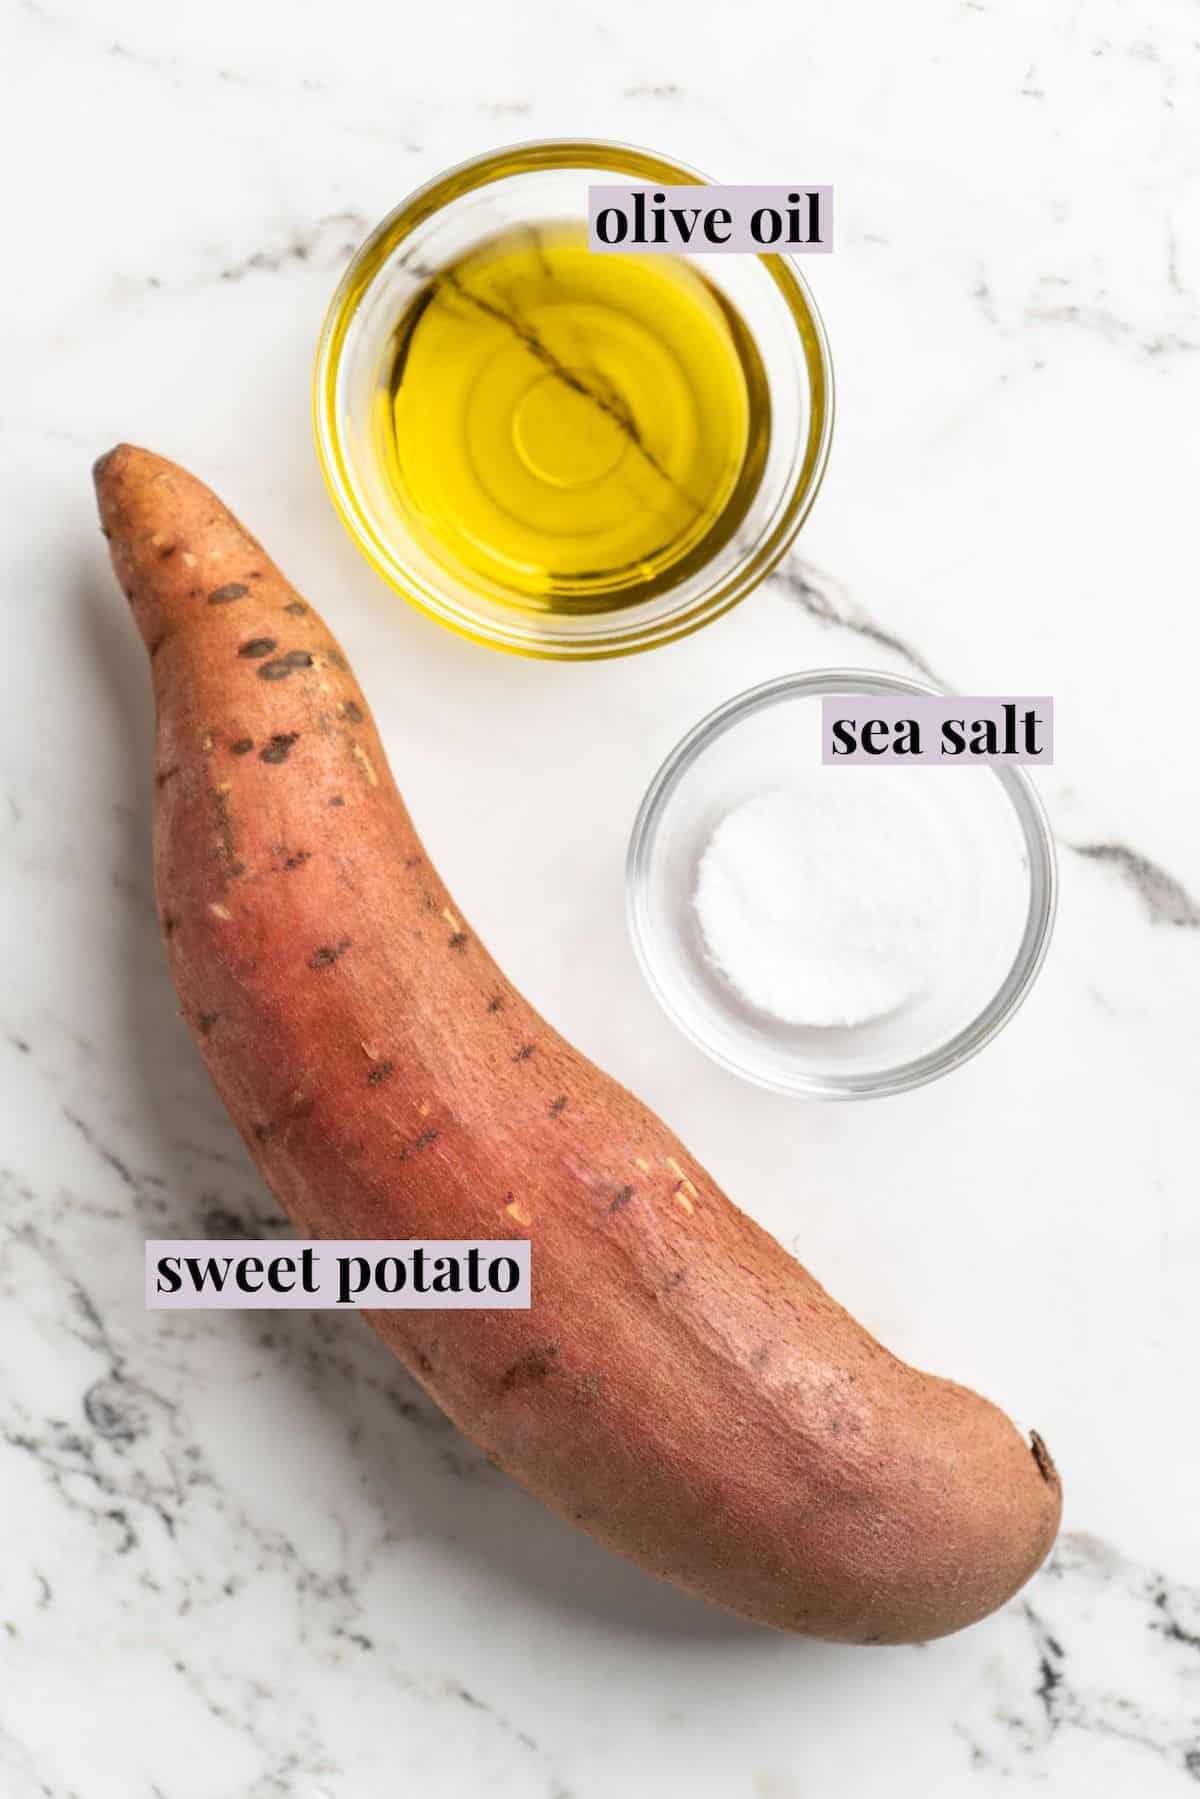 Overhead view of sweet potato, salt, and oil; ingredients for sweet potato chips